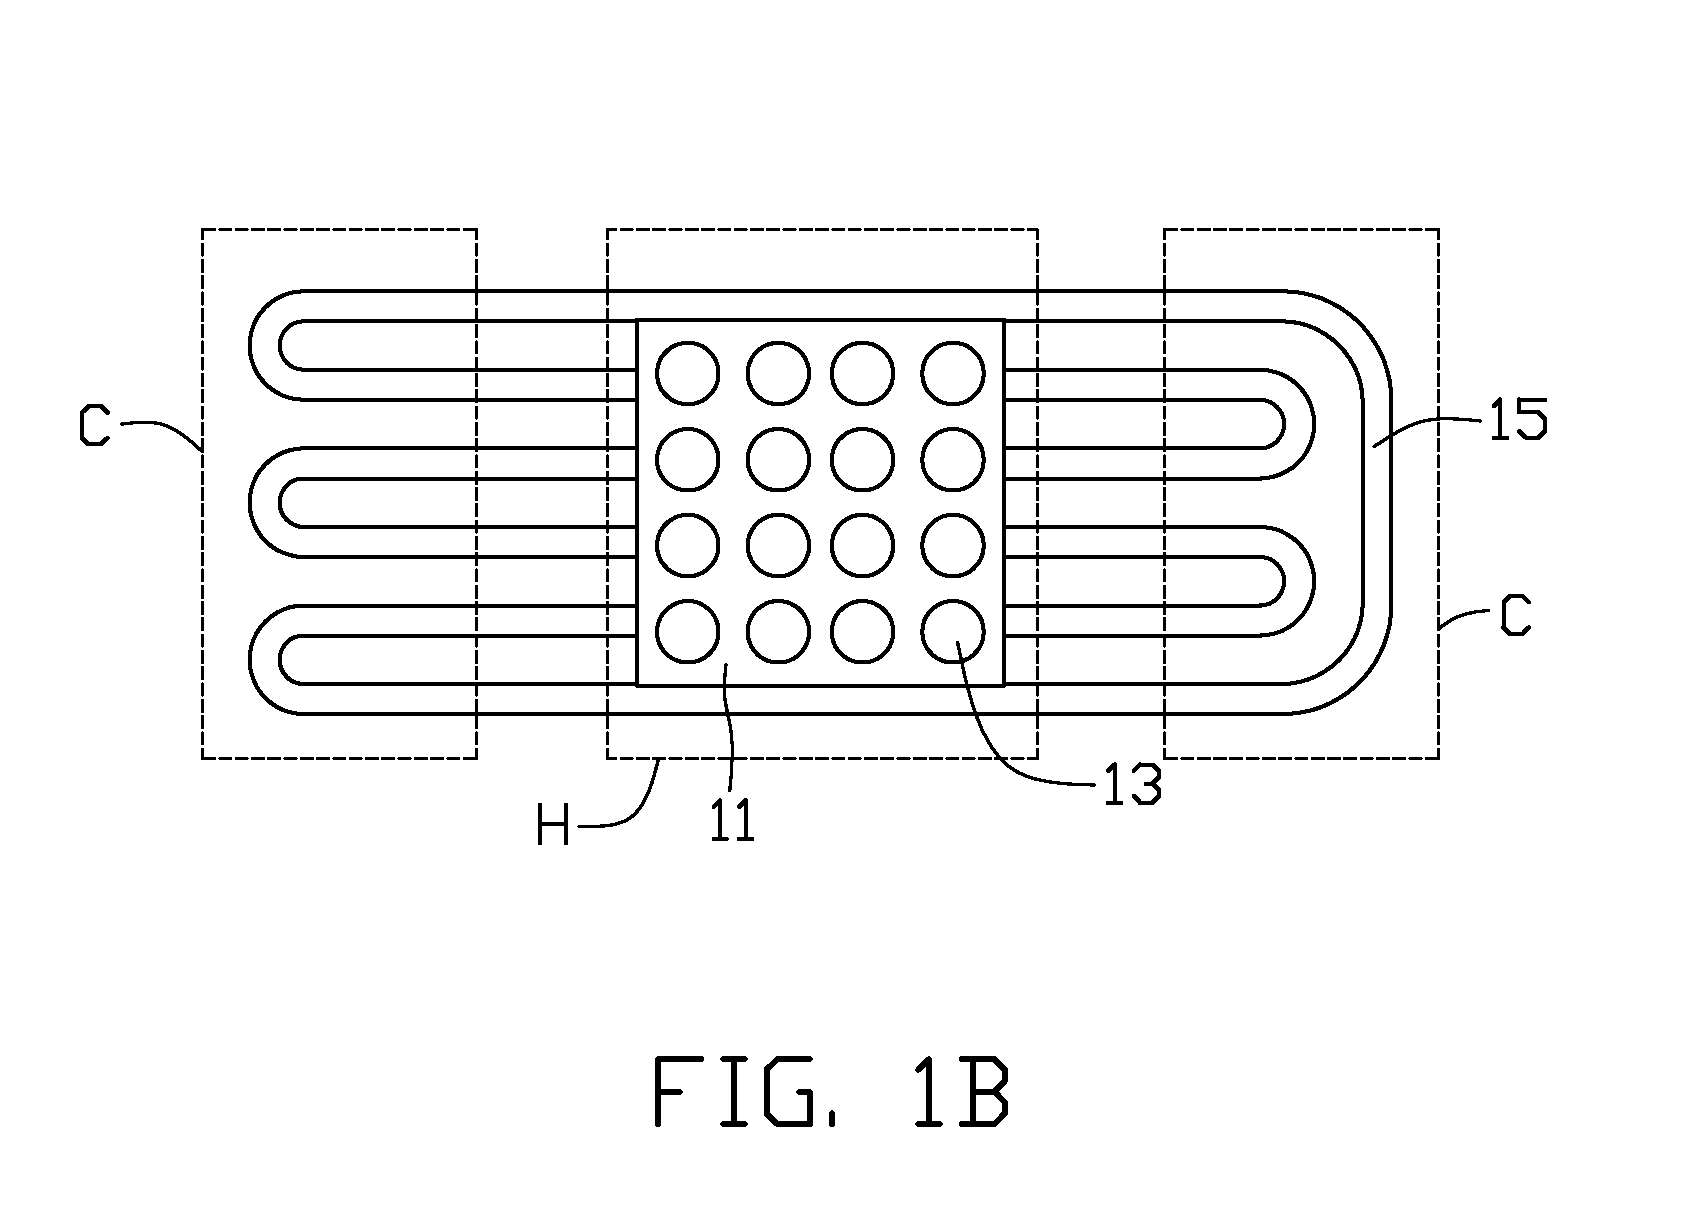 LED lamp cooling apparatus with pulsating heat pipe